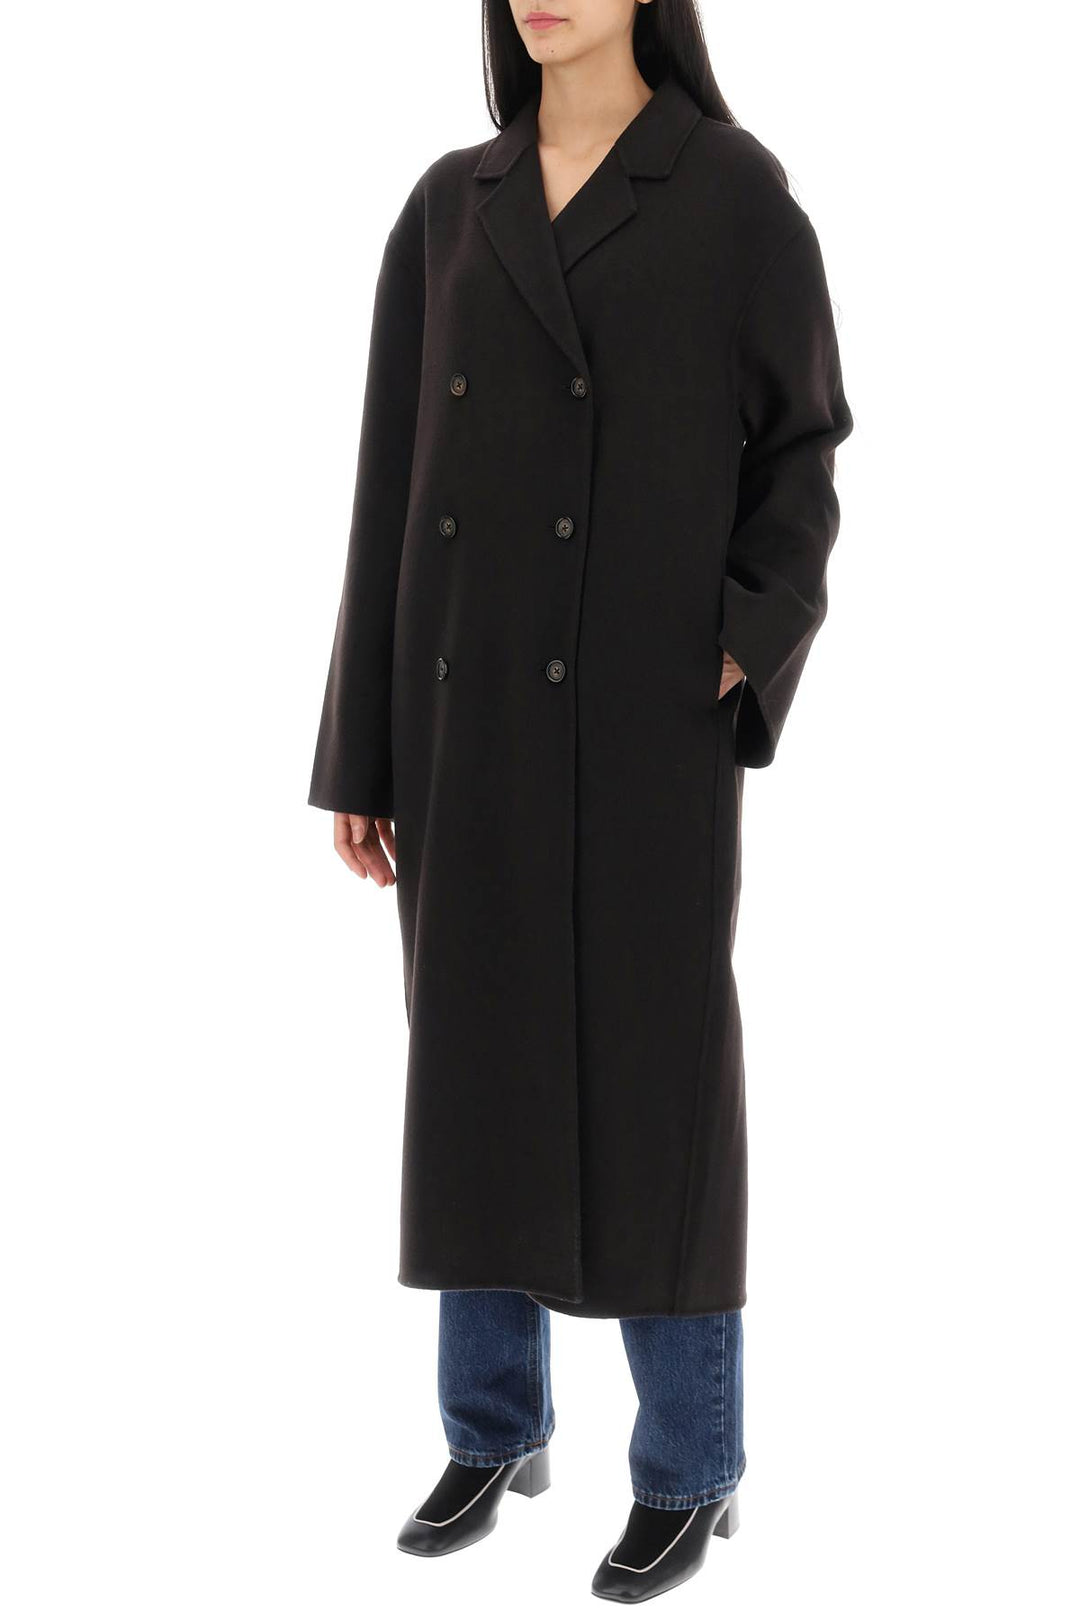 Toteme Oversized Double Breasted Wool Coat   Brown